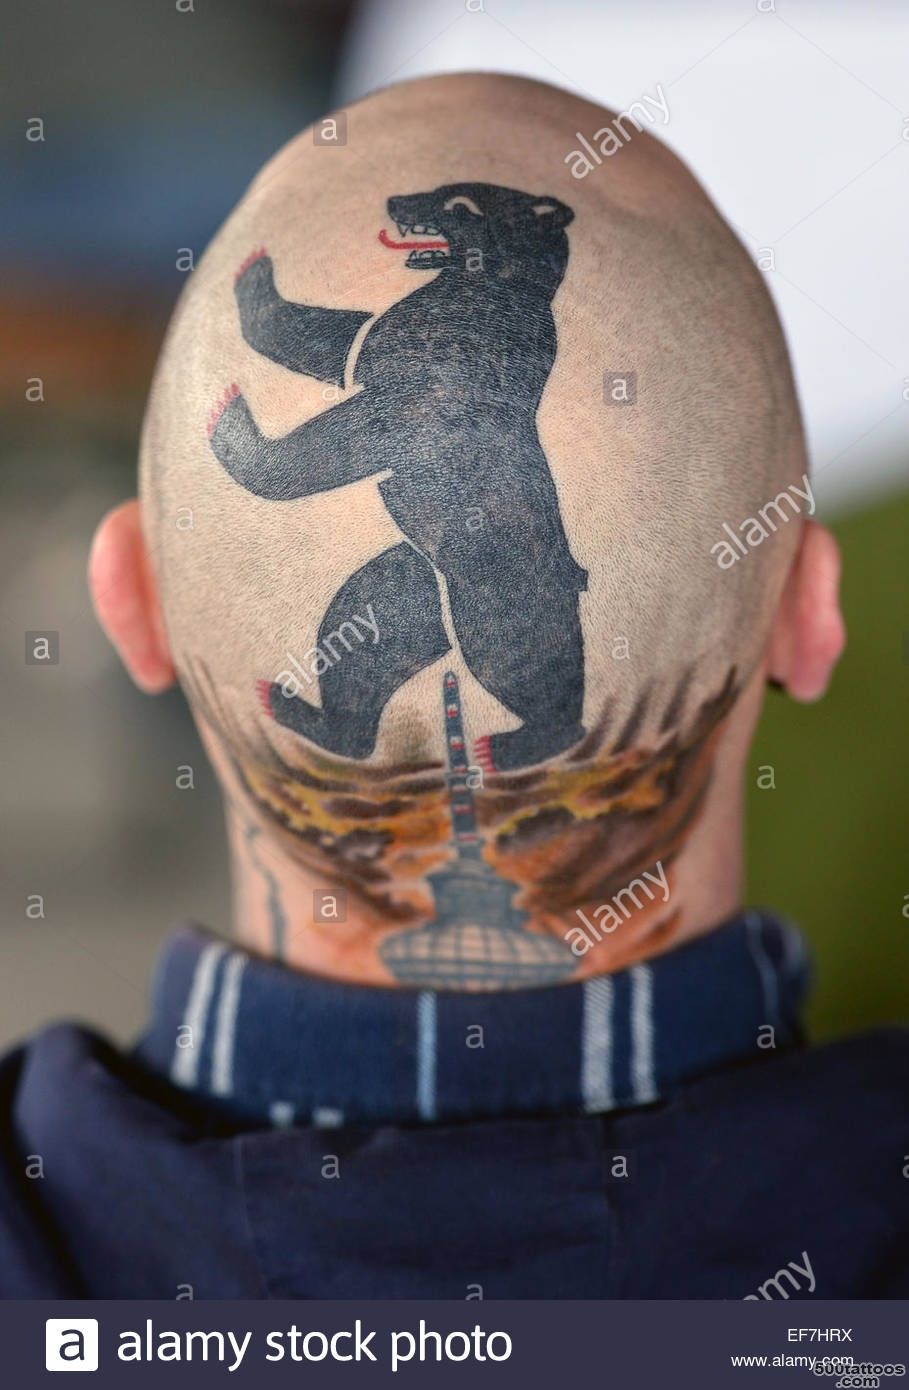 A Man Wears A Tattoo On His Head Showing The #39berlin Bear#39 And The ..._41